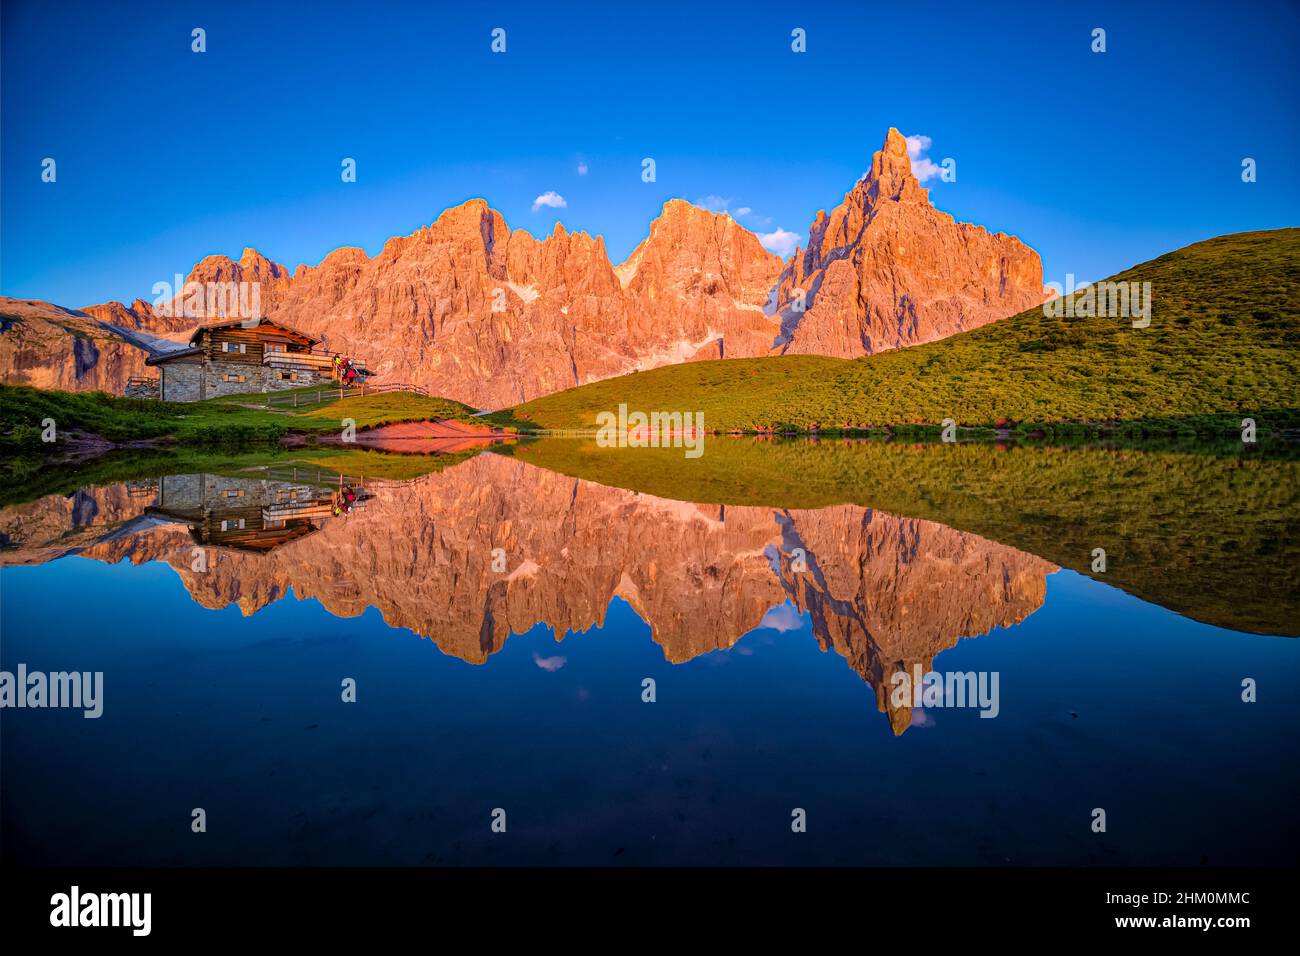 Baita Segantini, an alpine hut and summits and rock faces of the Pala group, reflecting in a lake at sunset. Stock Photo